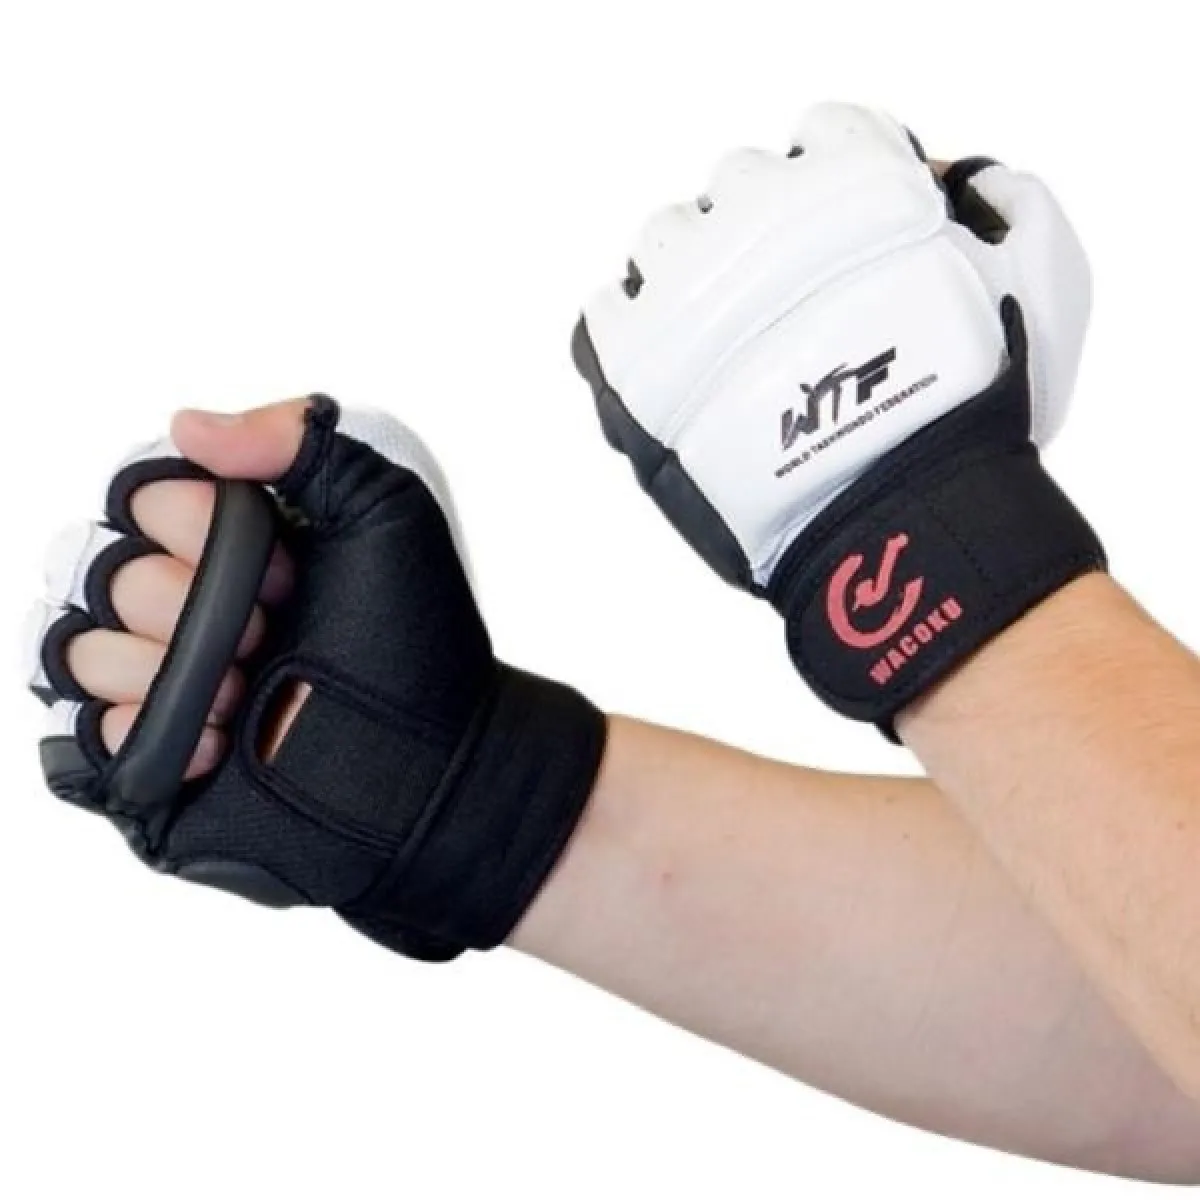 WT fist protectors, hand protection for Taekwondo with approval